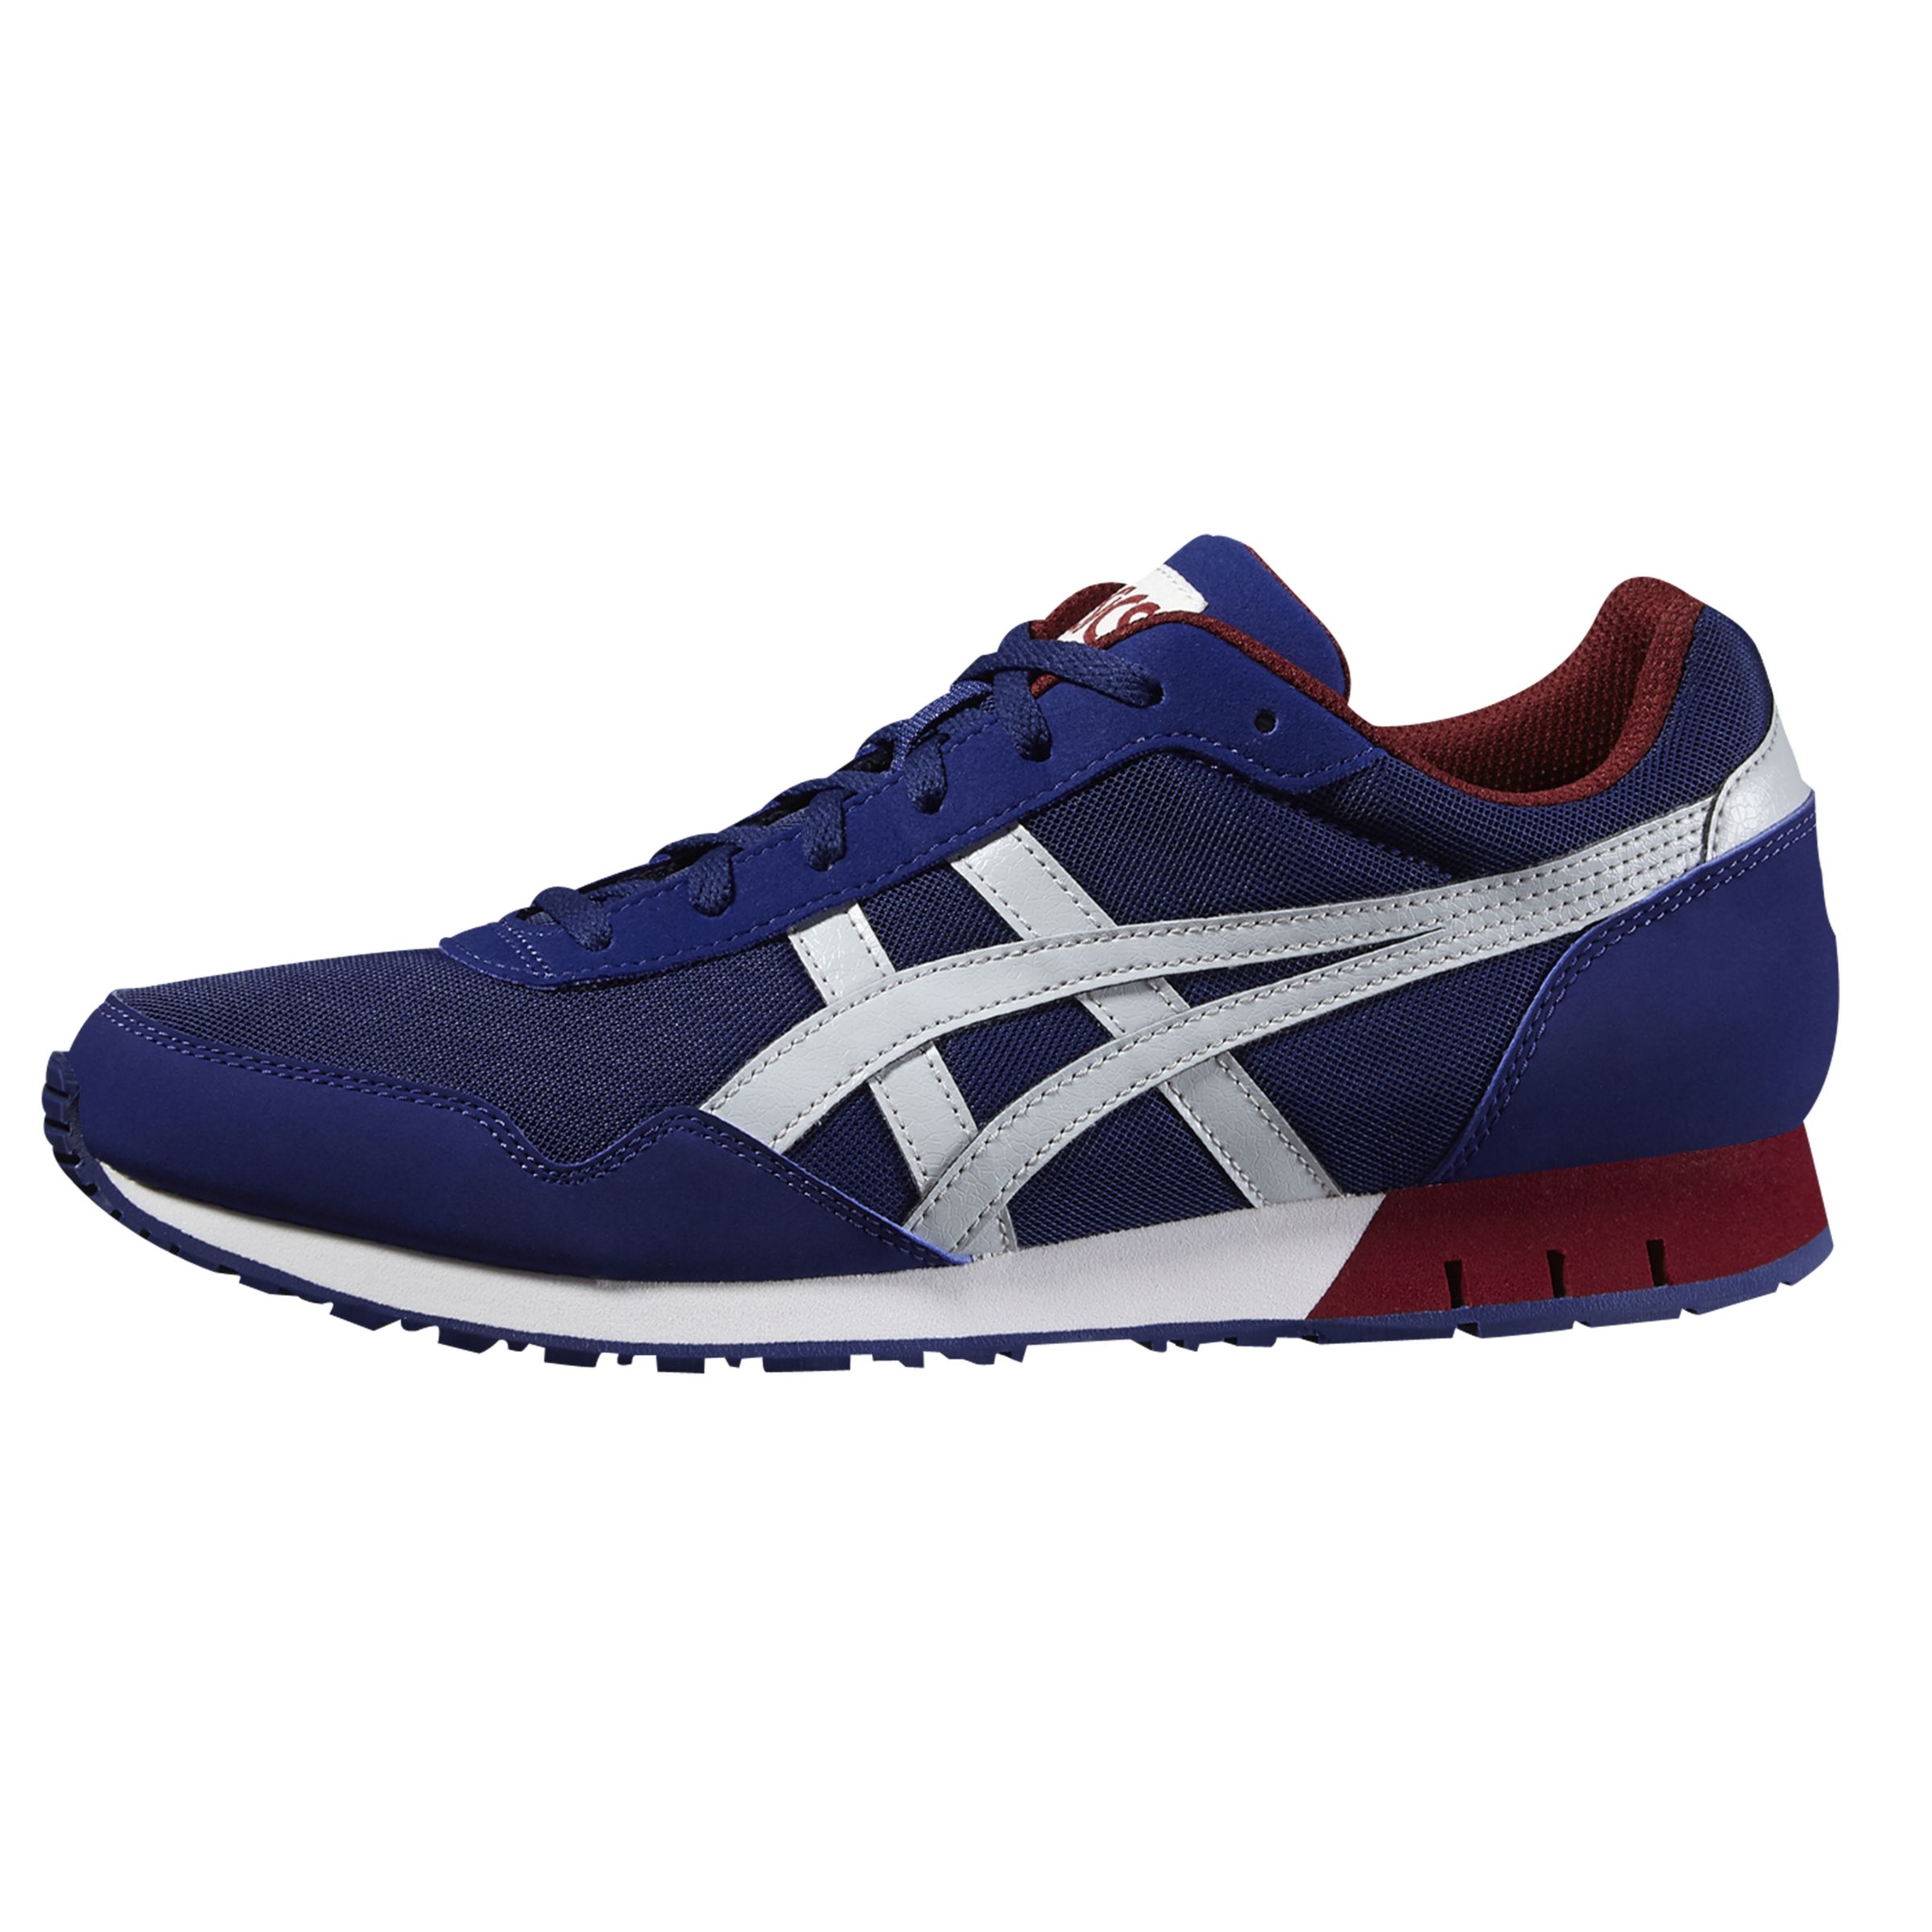 asics curreo trainers